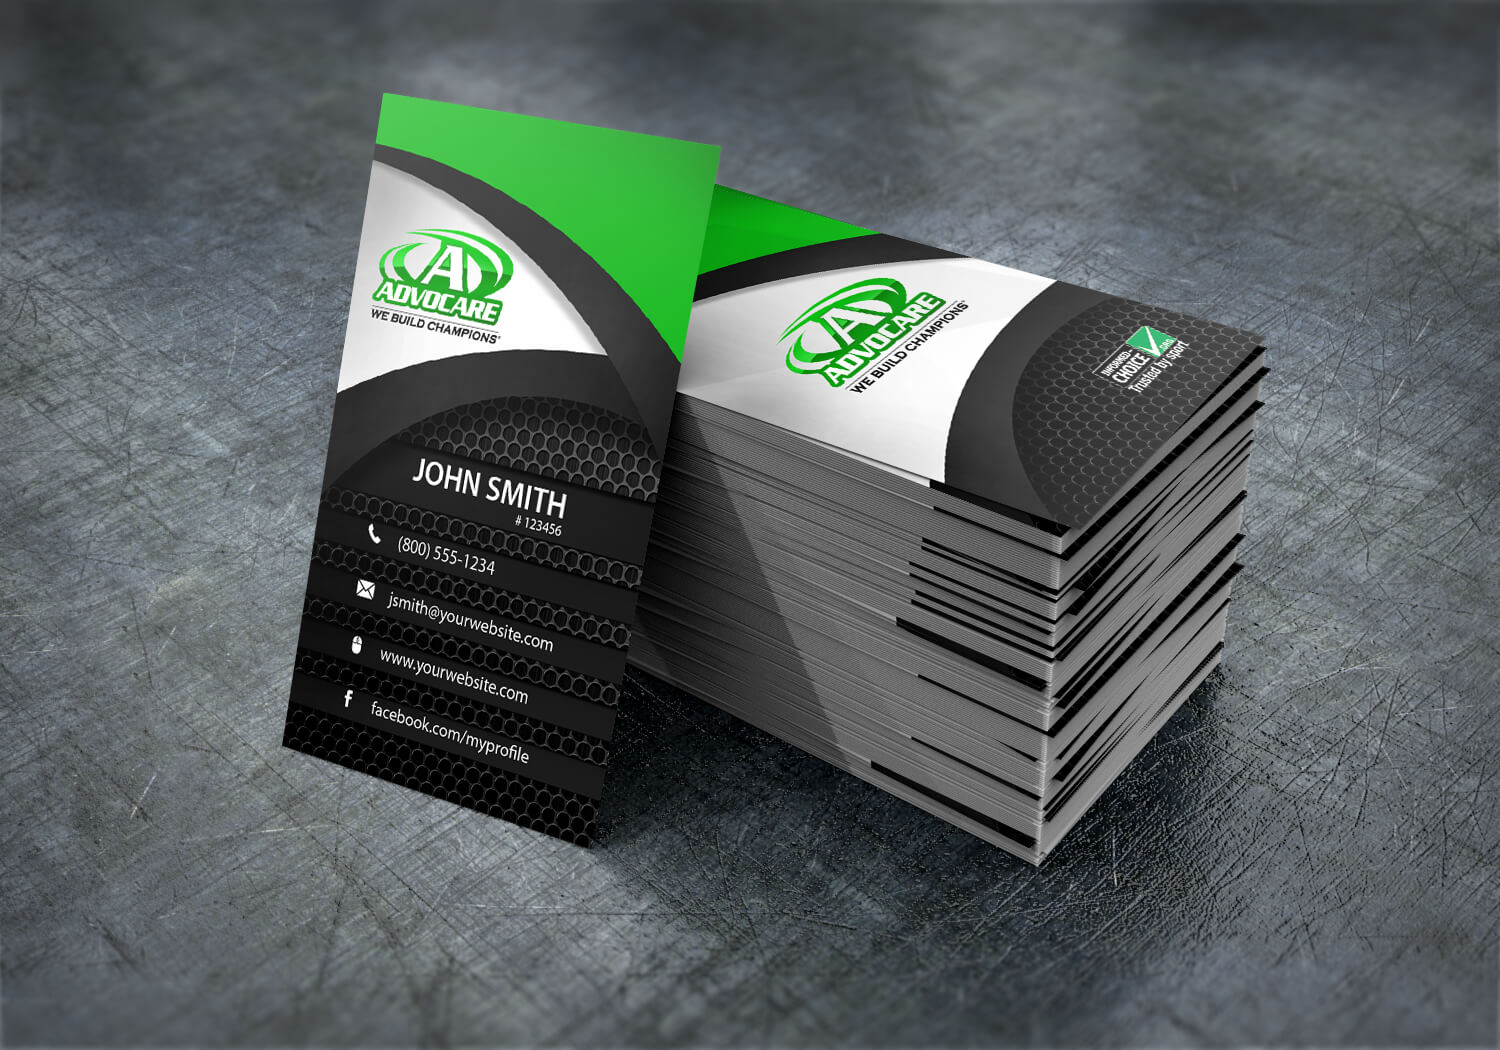 New Cards Are Here For Advocare Distributors! #mlm #advocare For Advocare Business Card Template